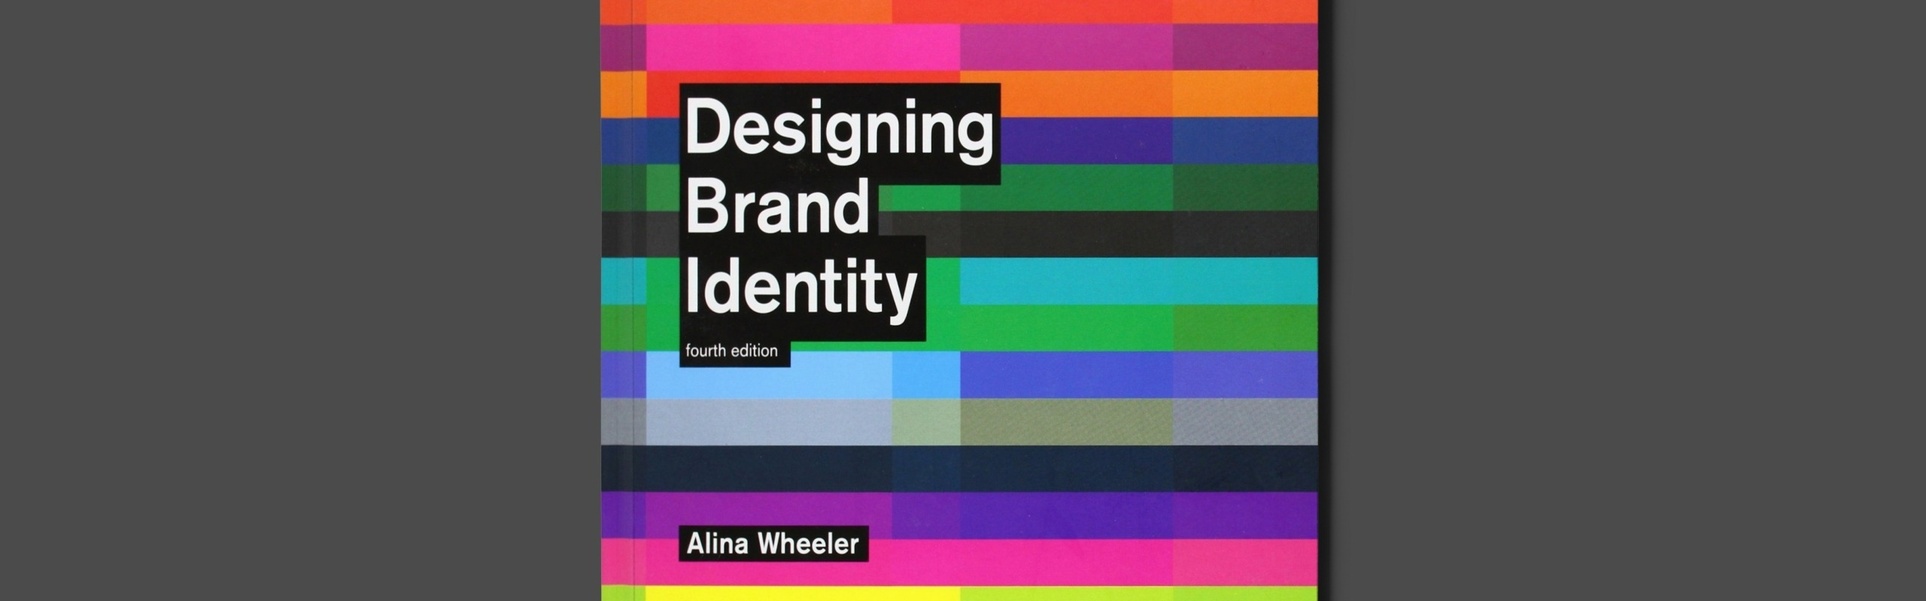 Designing Brand Identity-An Essential Guide for the Whole Branding Team